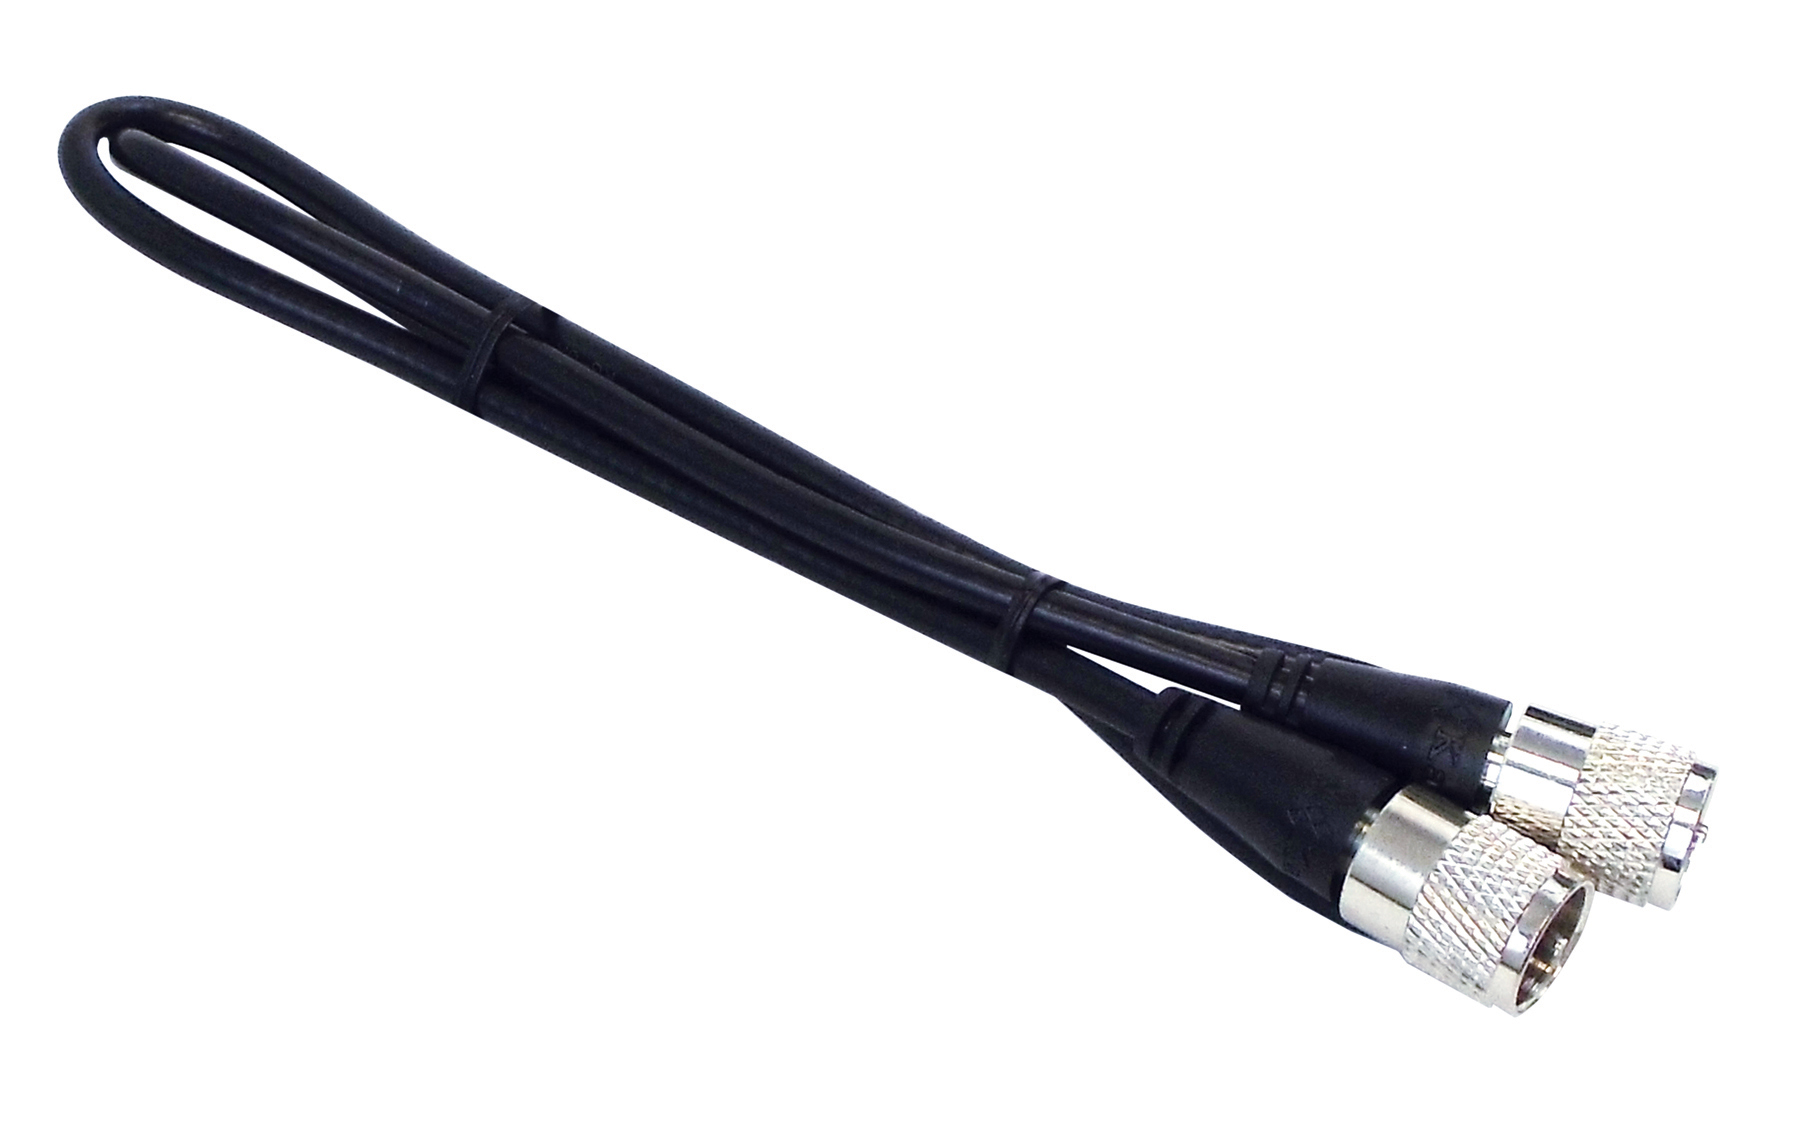 Kalibur 1.5 Foot Black Rg8X Coax Cable Assembly With Molded Pl259 Connectors On Each End